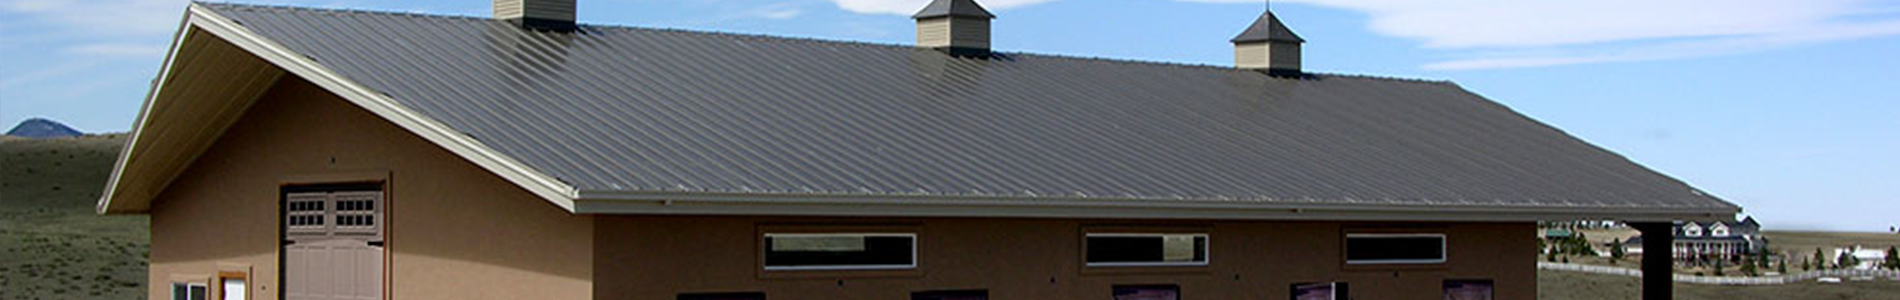 Metal Building Roof Pitch